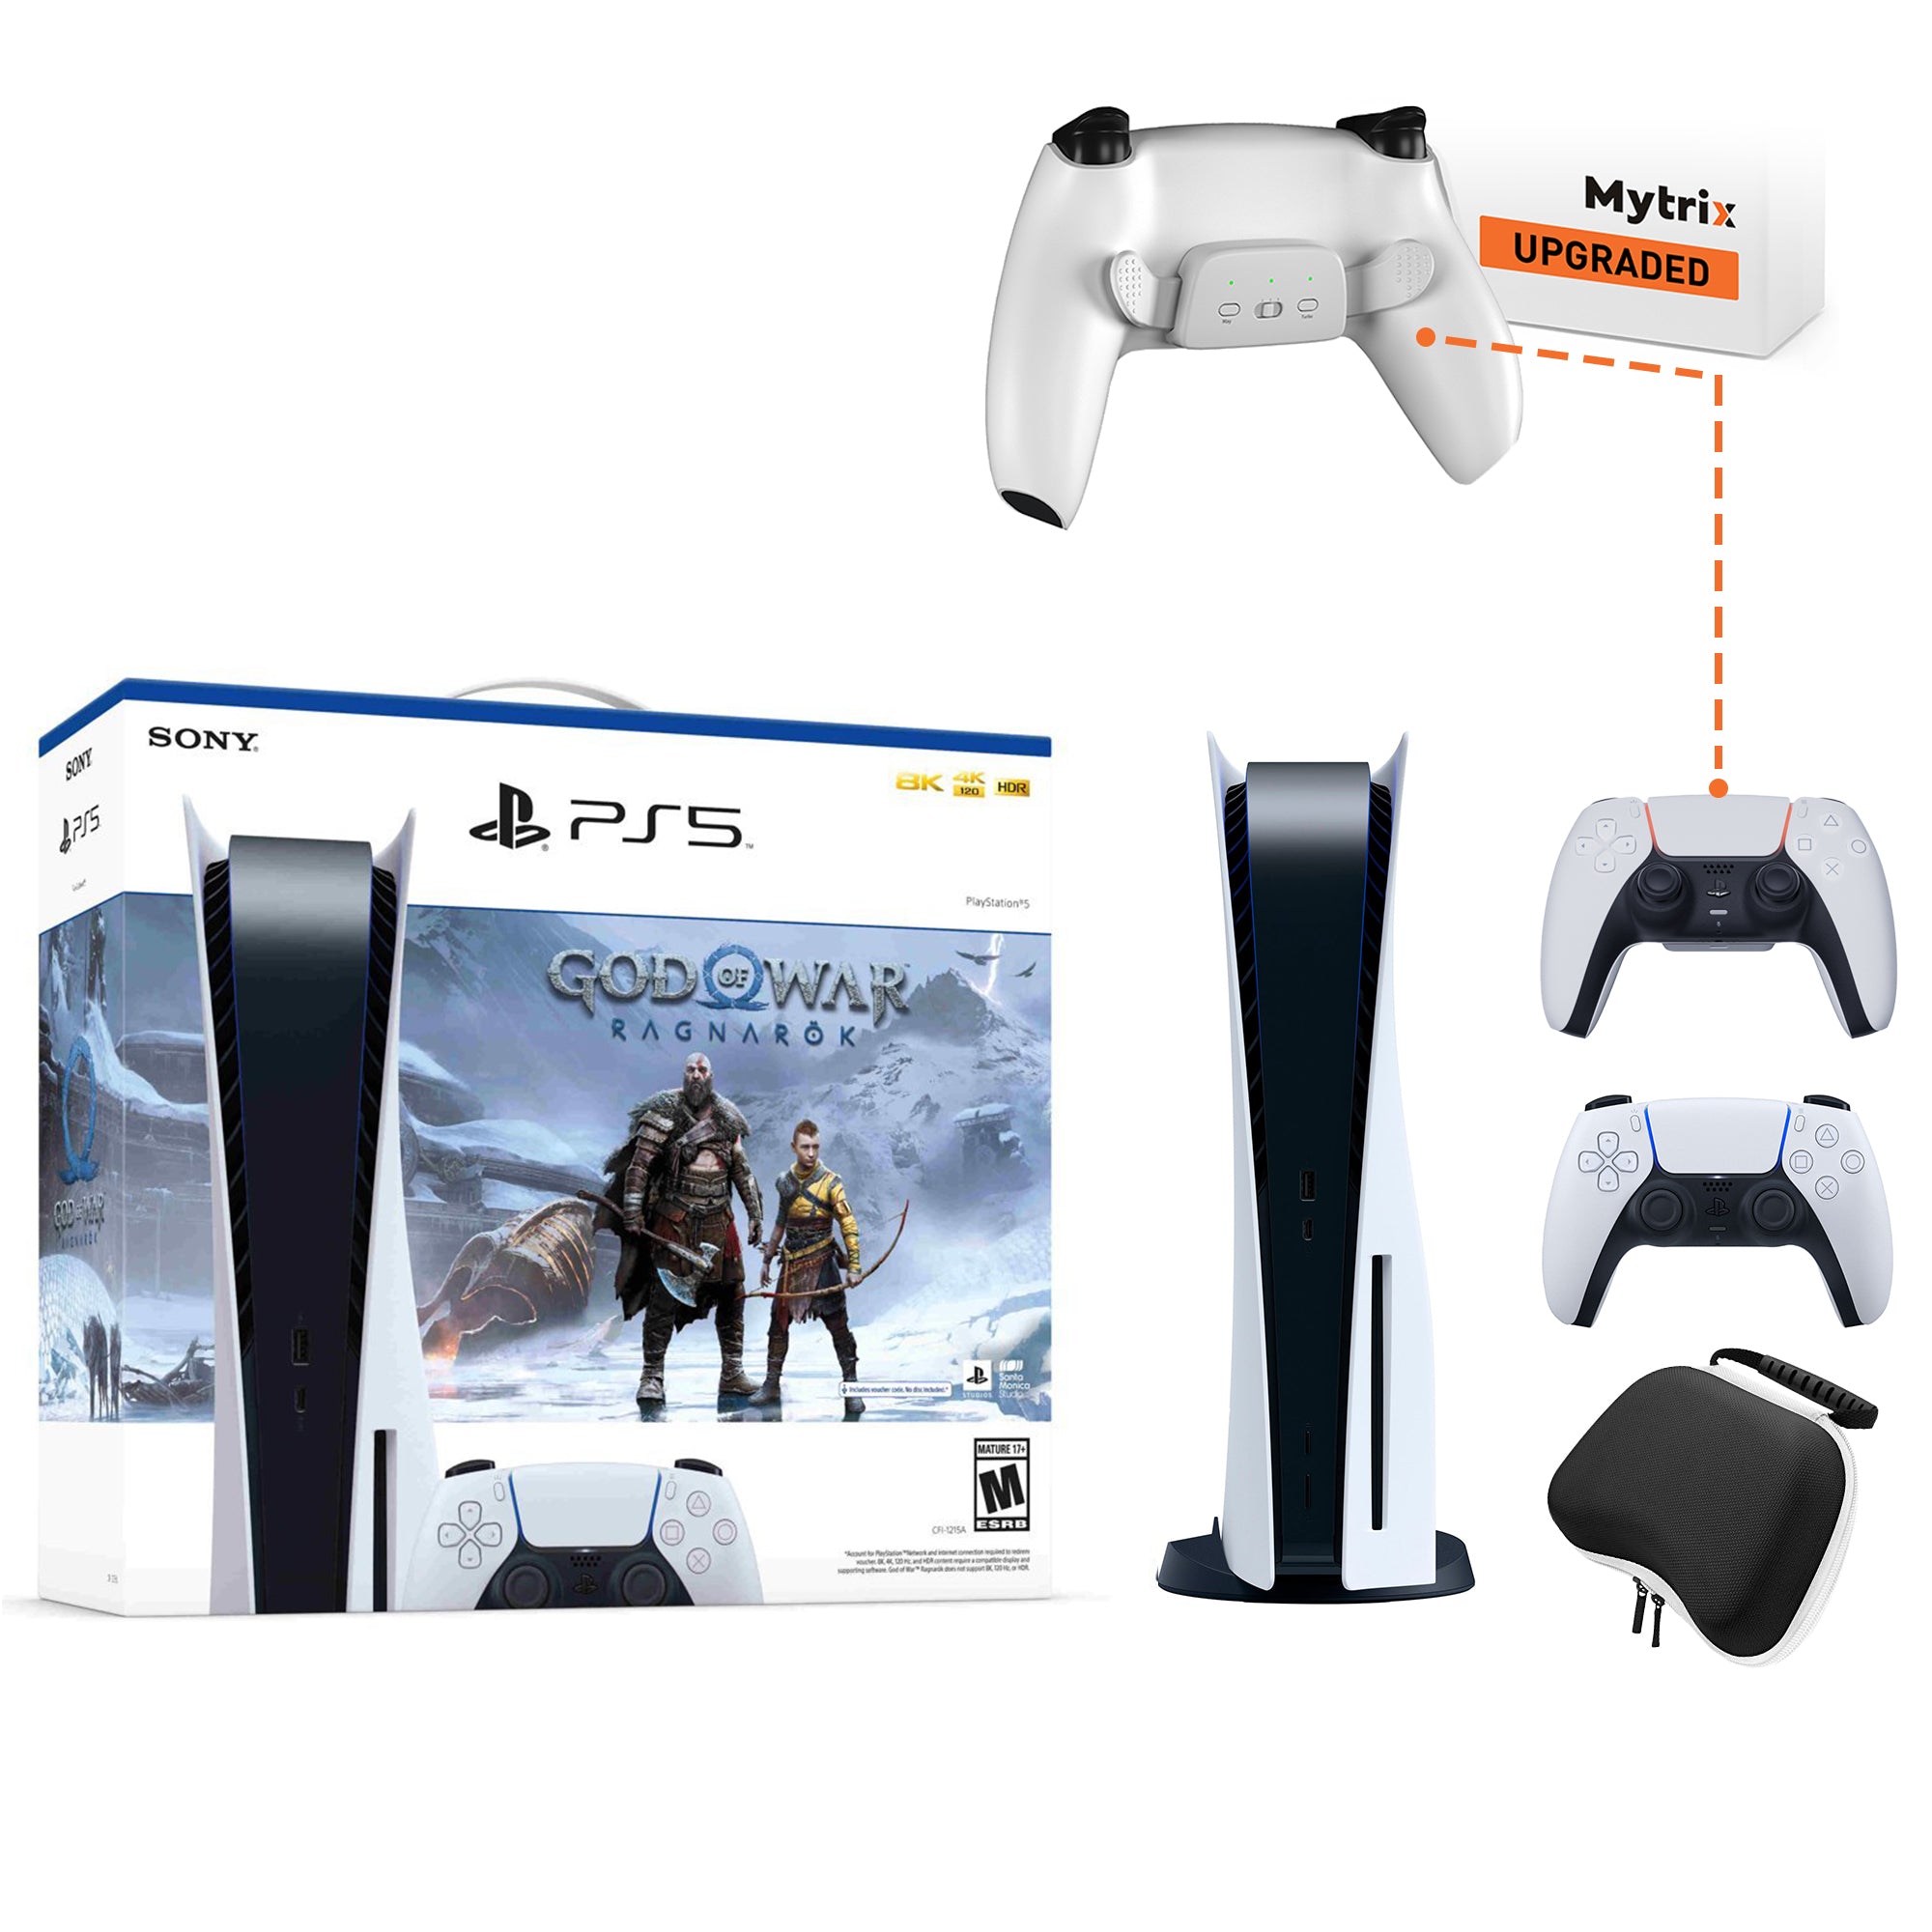 PlayStation 5 Disc Edition God of War Ragnarok Bundle, an Additional Mytrix Upgraded PS5 Controller with Remappable Back Paddles and Turbo Function, and Hard Shell Protective Controller Case